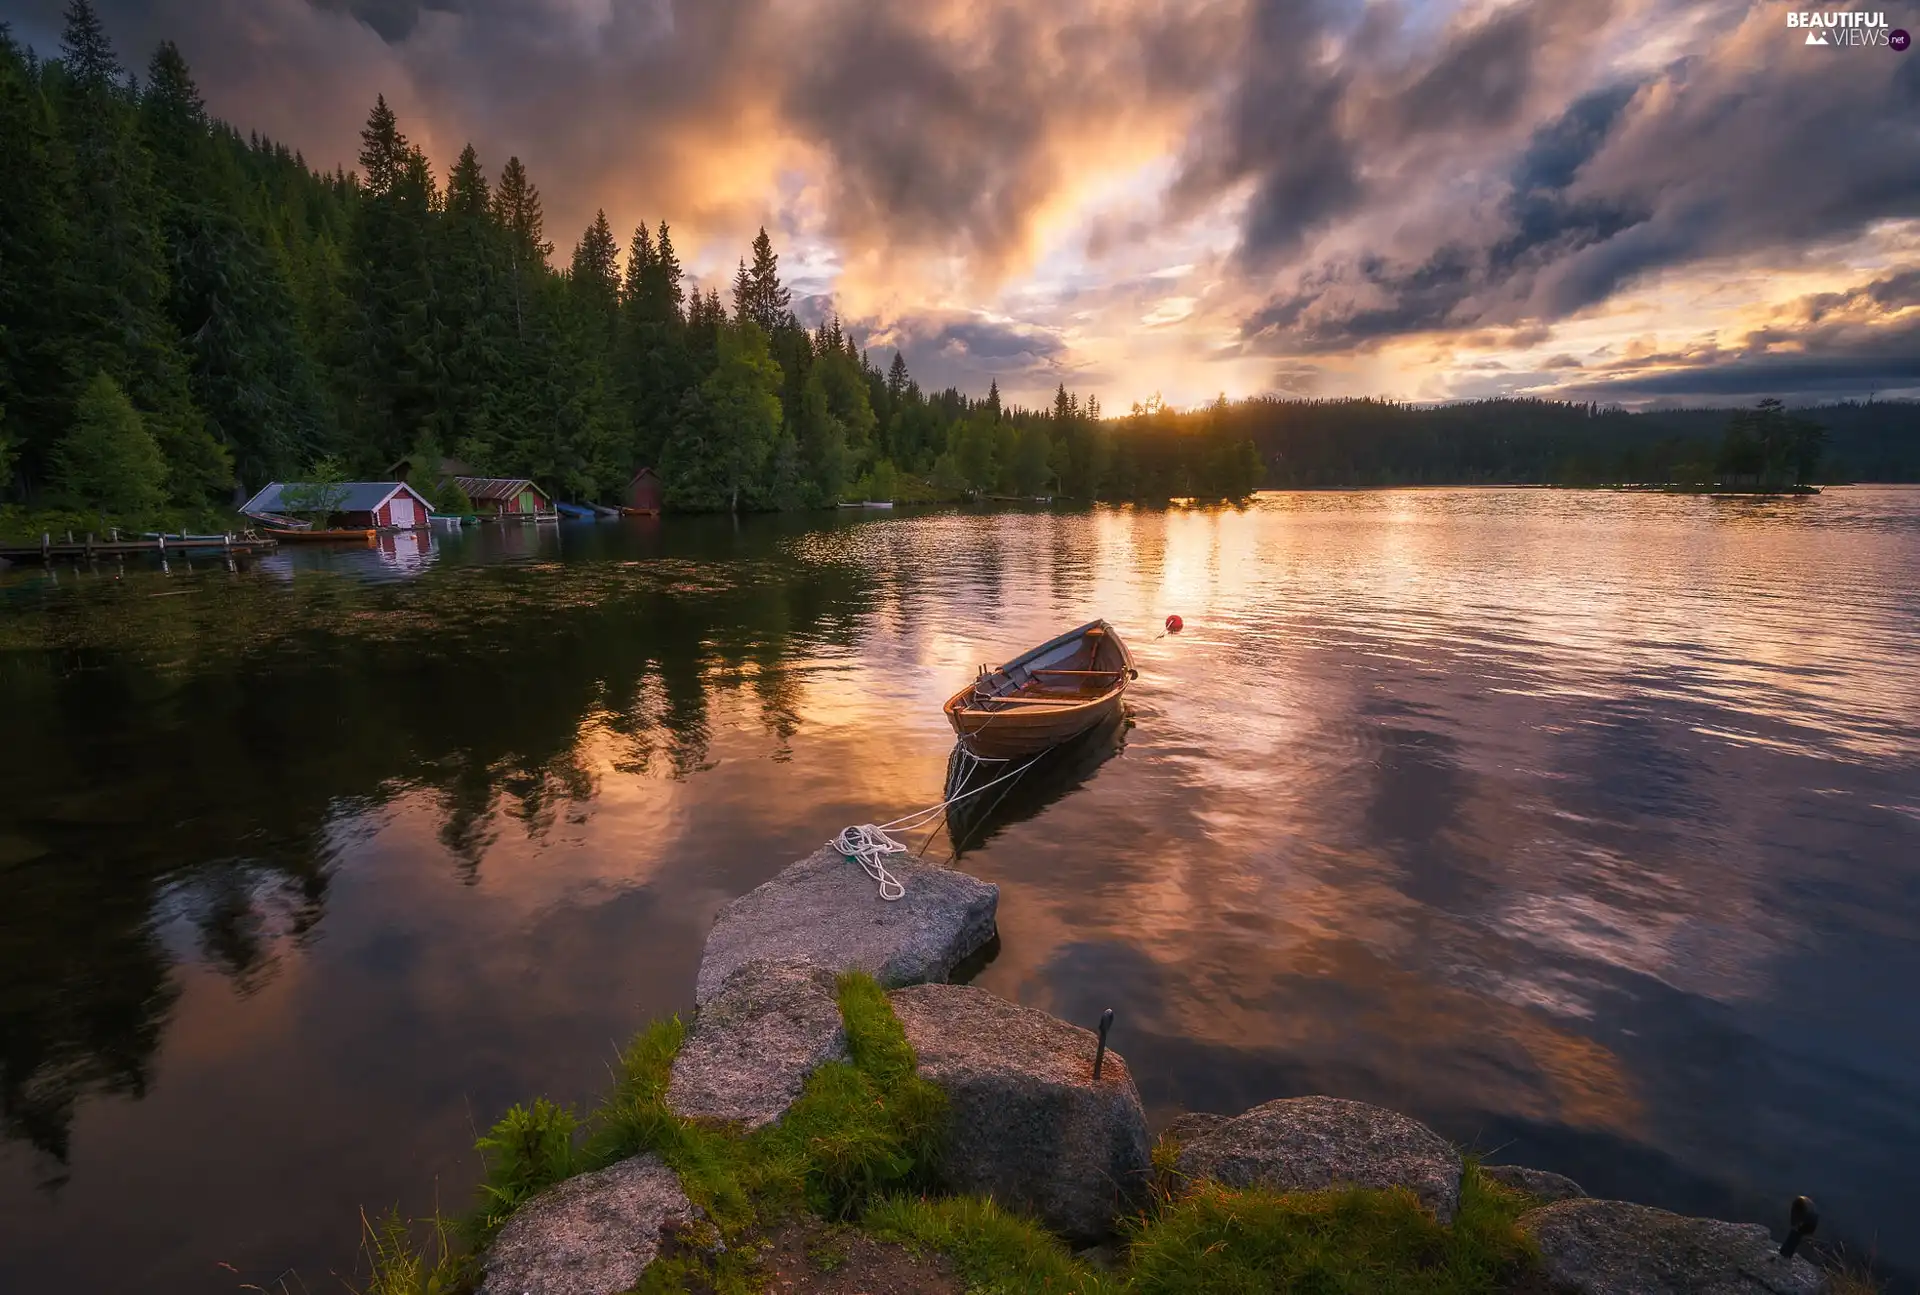 Houses, Ringerike, Oyangen Lake, trees, Stones, Norway, Great Sunsets, viewes, forest, Boat